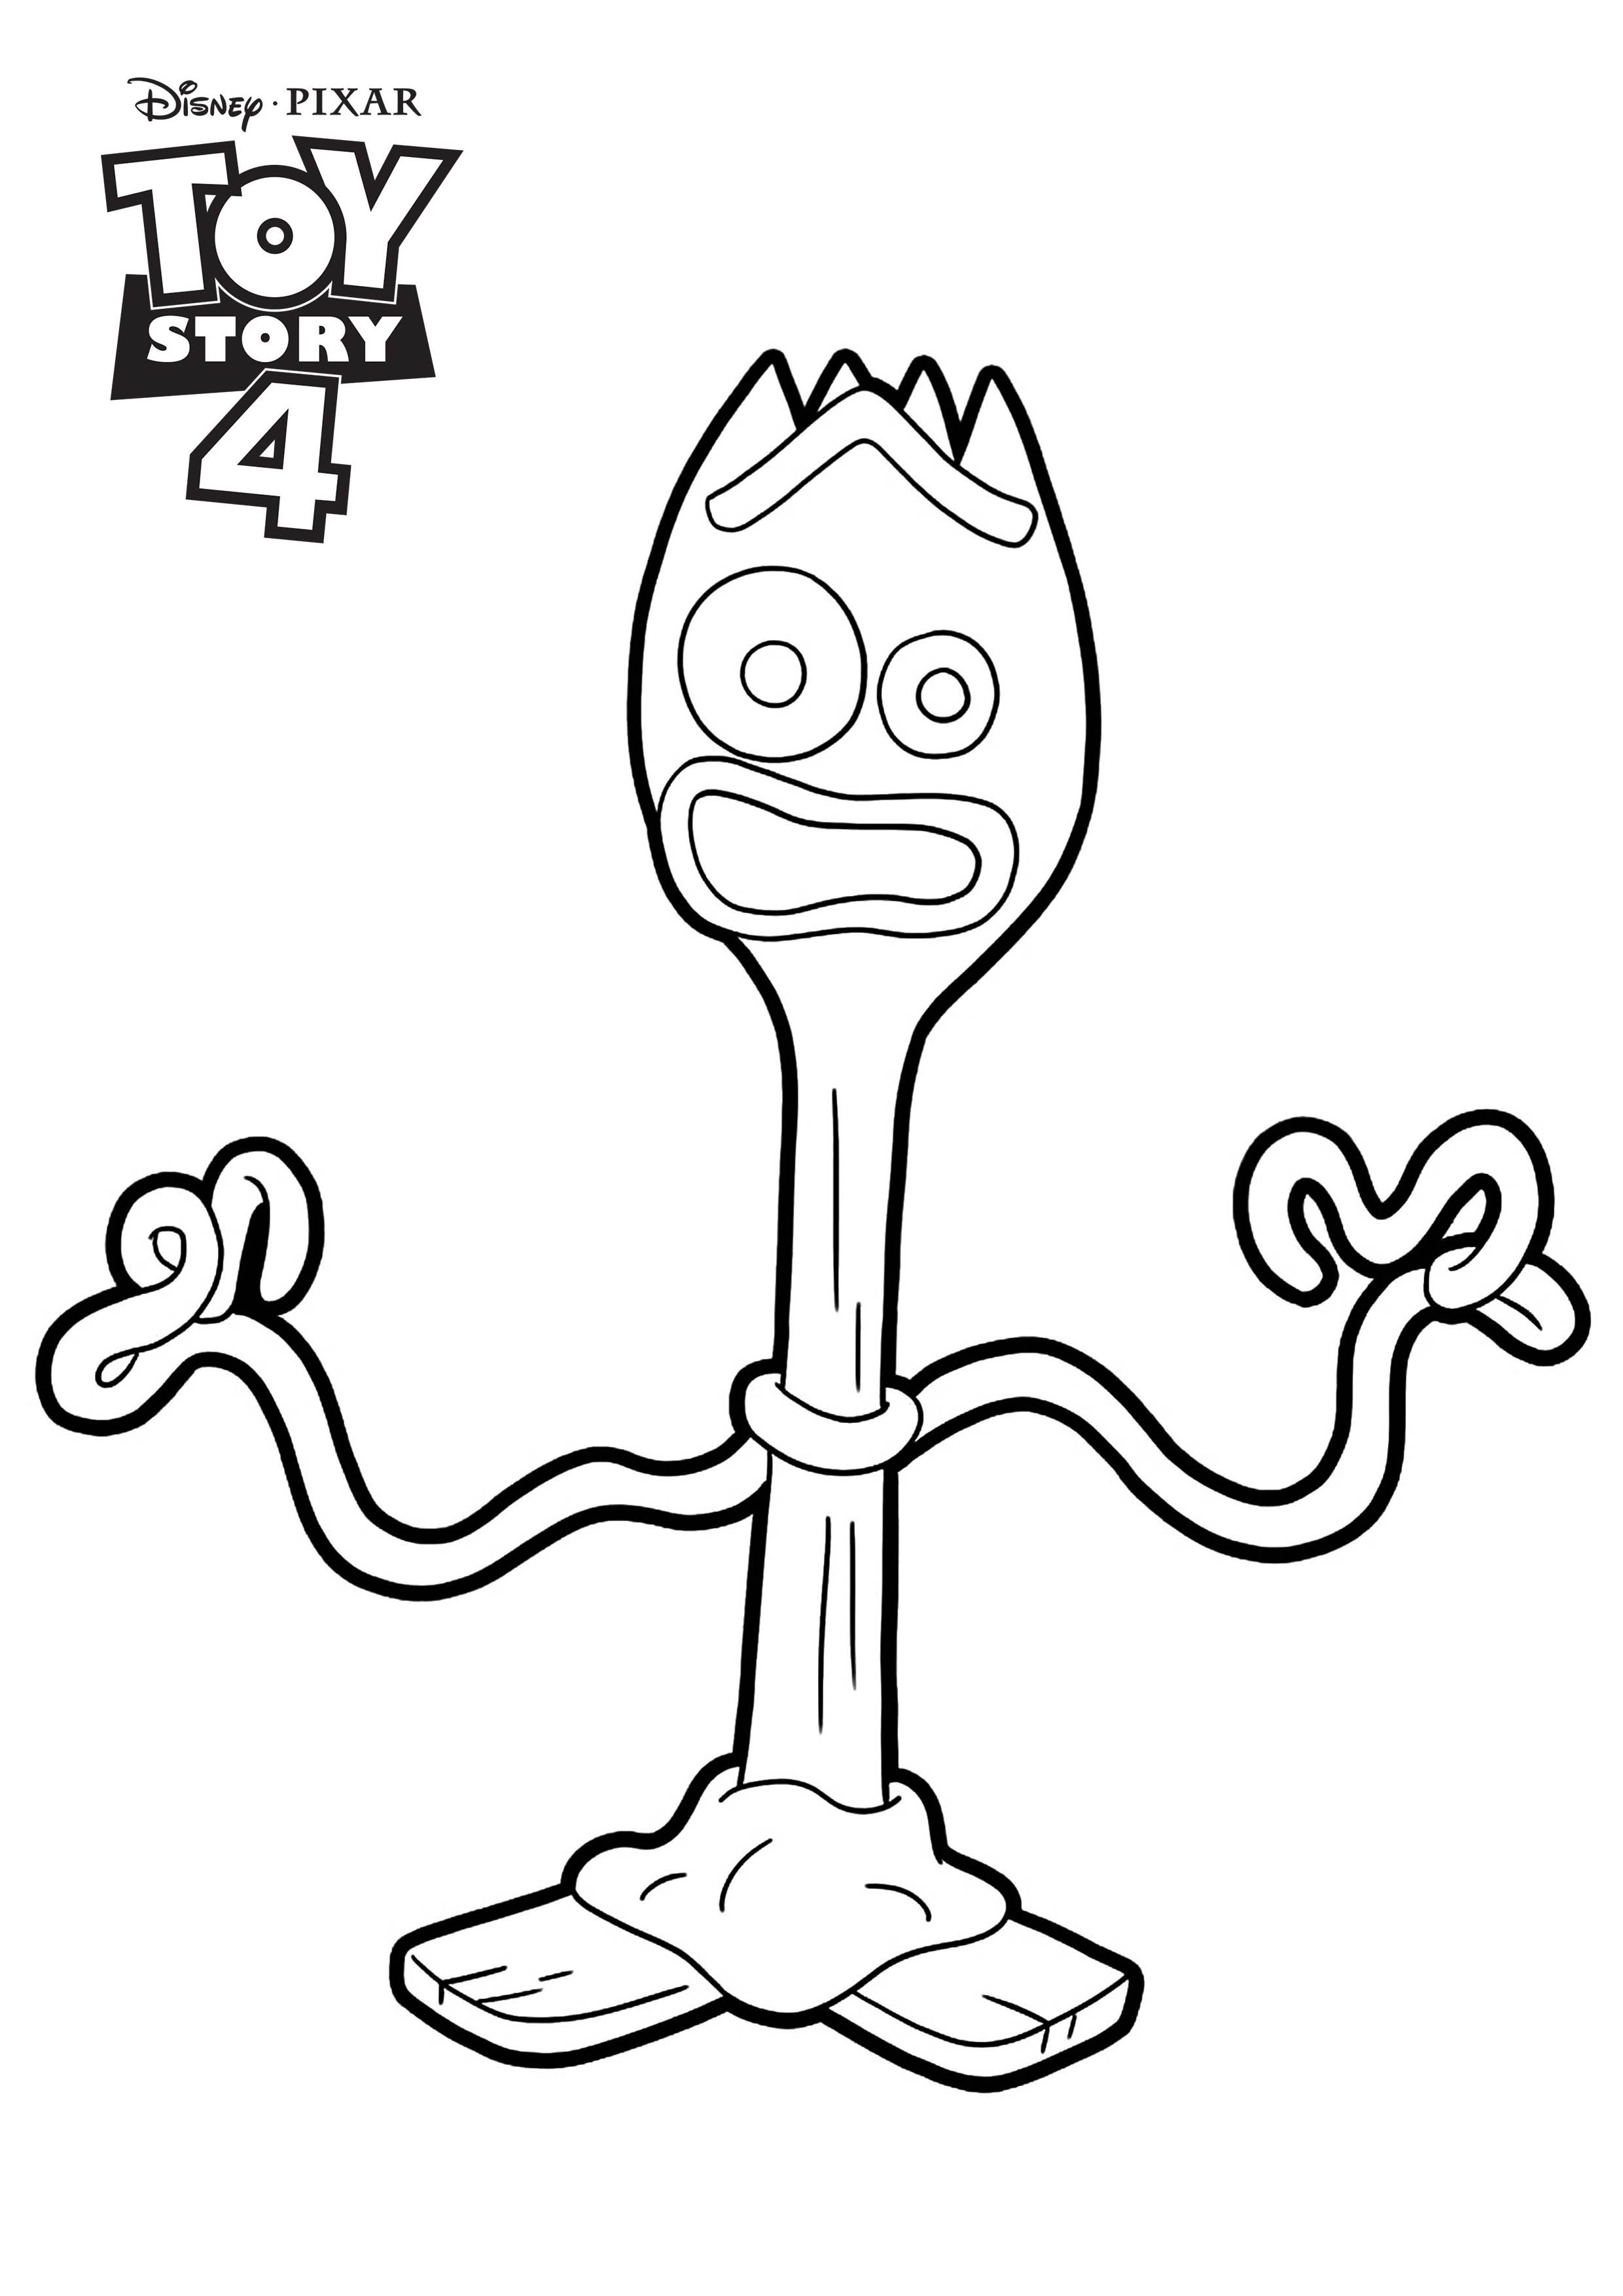 Download Forky Toy Story 4 Coloring Page Disney Pixar Toy Story 4 Kids Coloring Pages